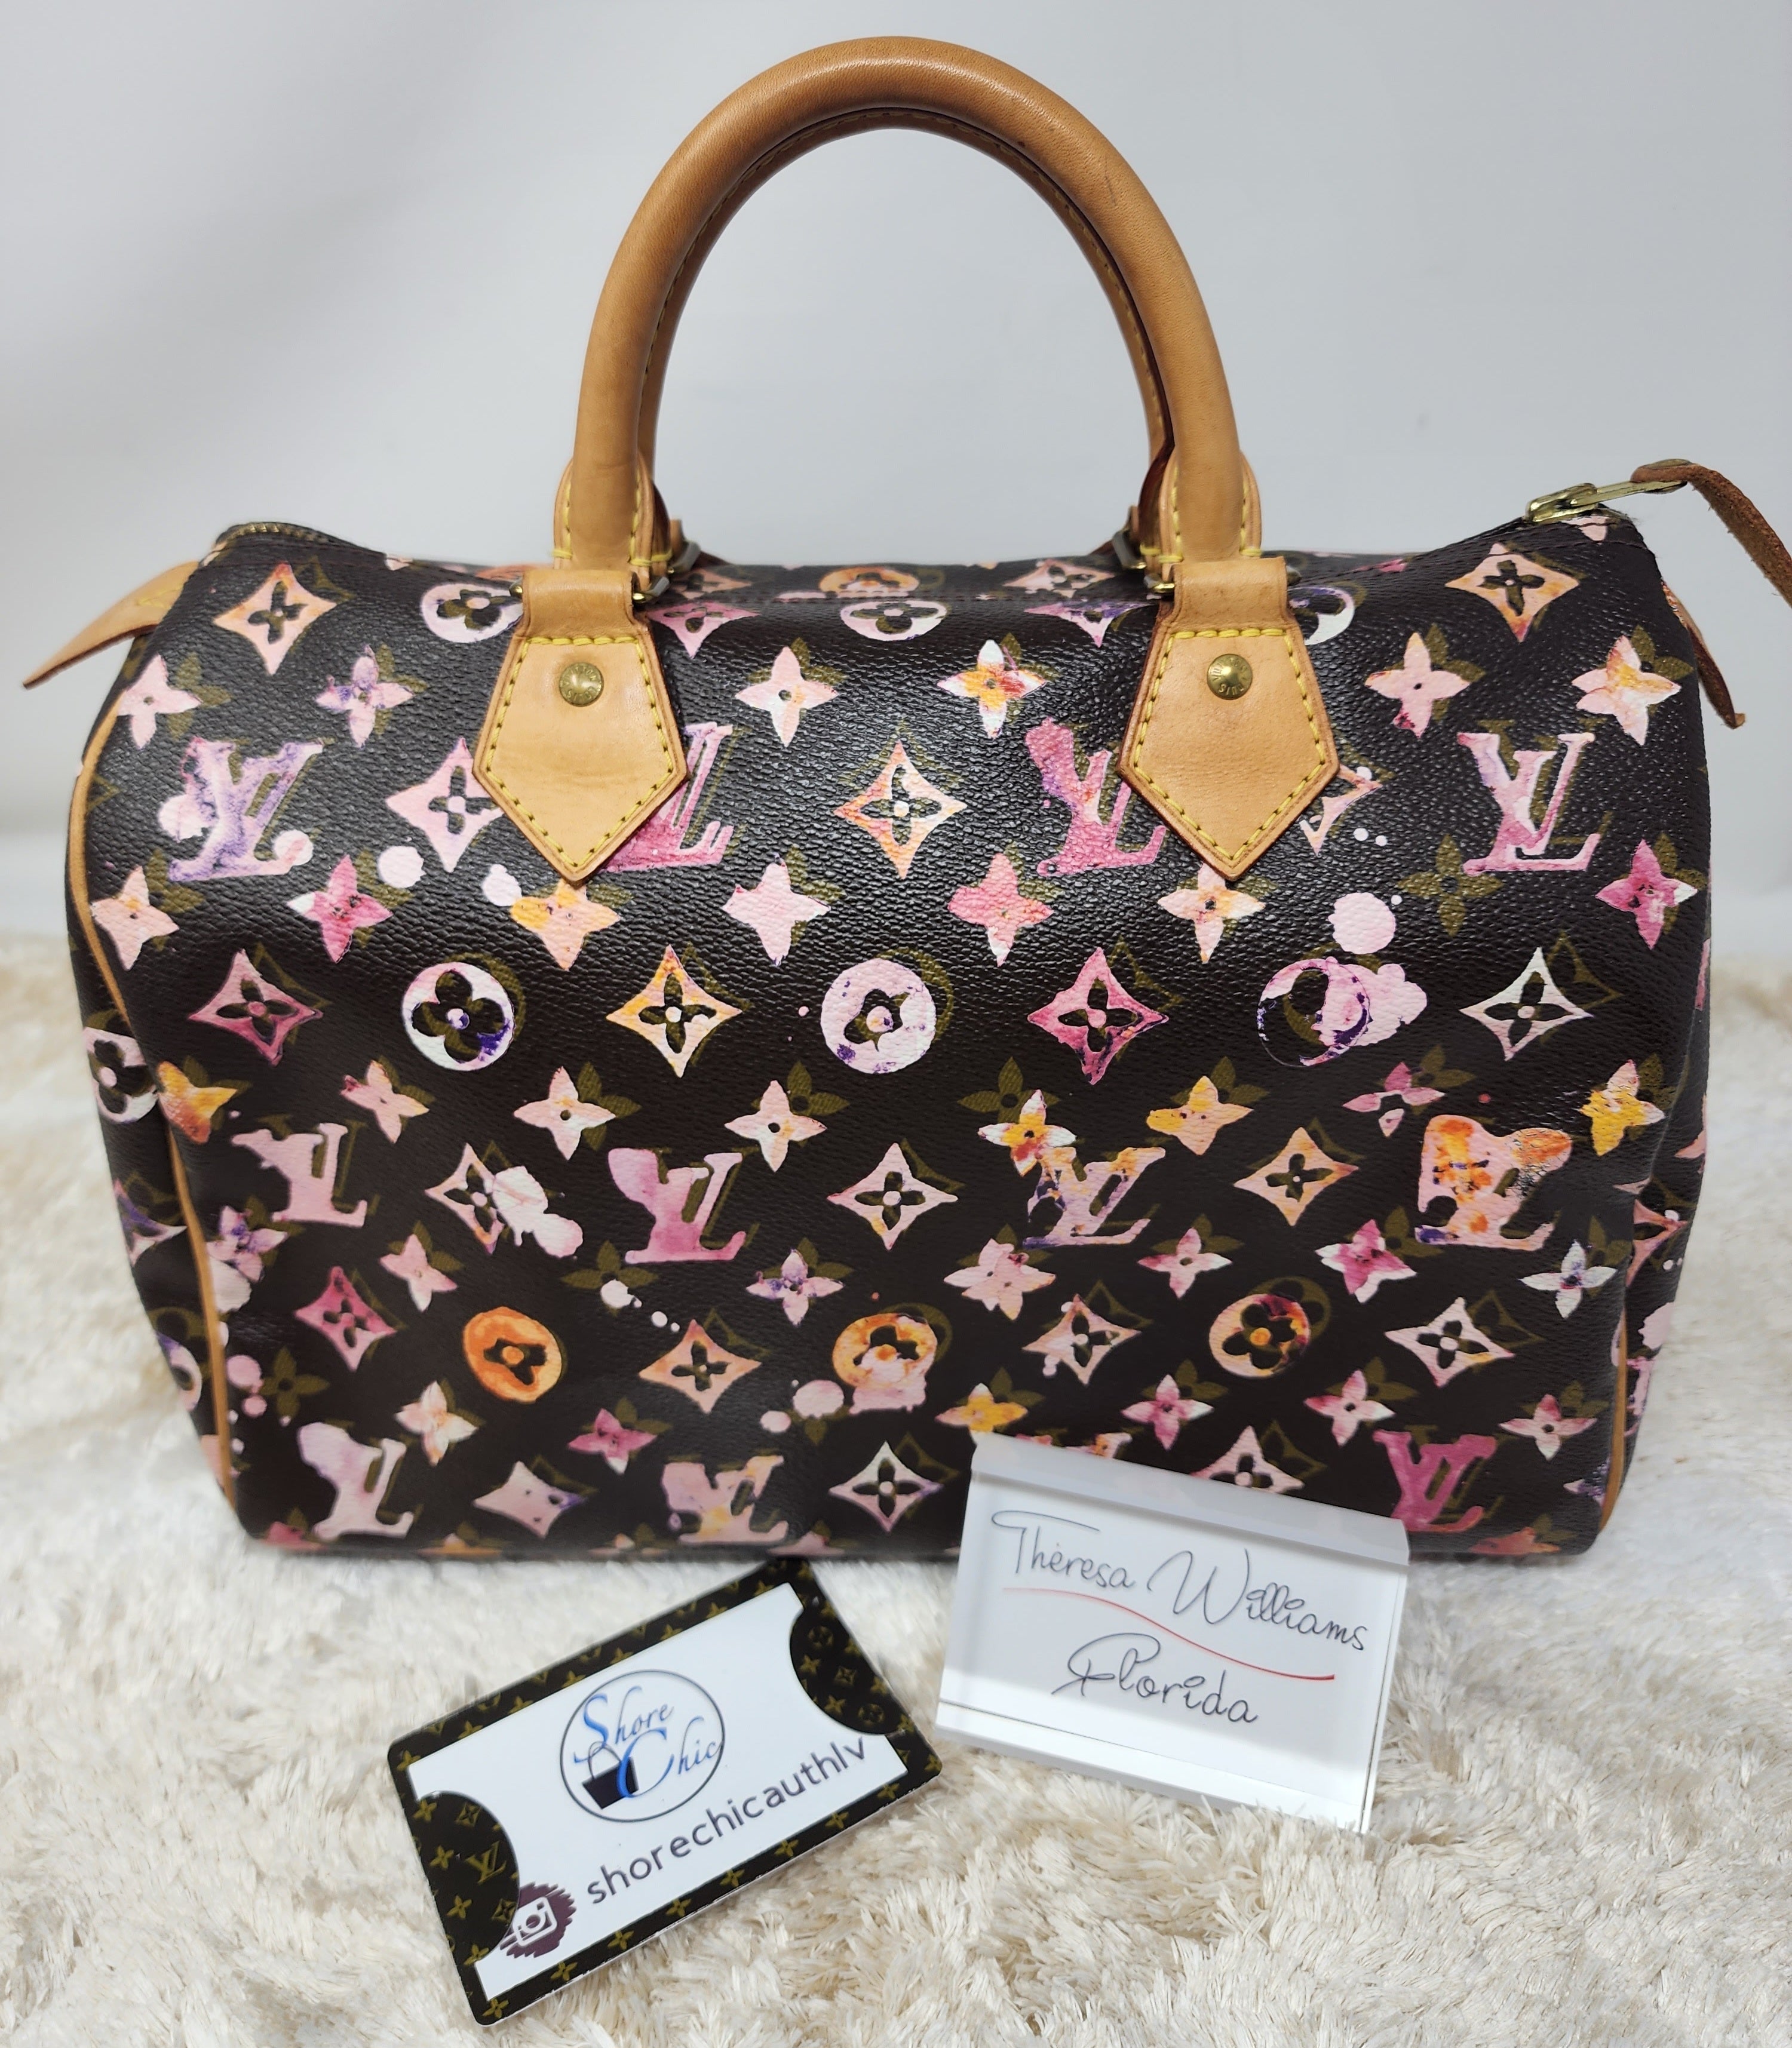 LOUIS VUITTON LIMITED EDITION WATERCOLOR SPEEDY 30 – Shore Chic